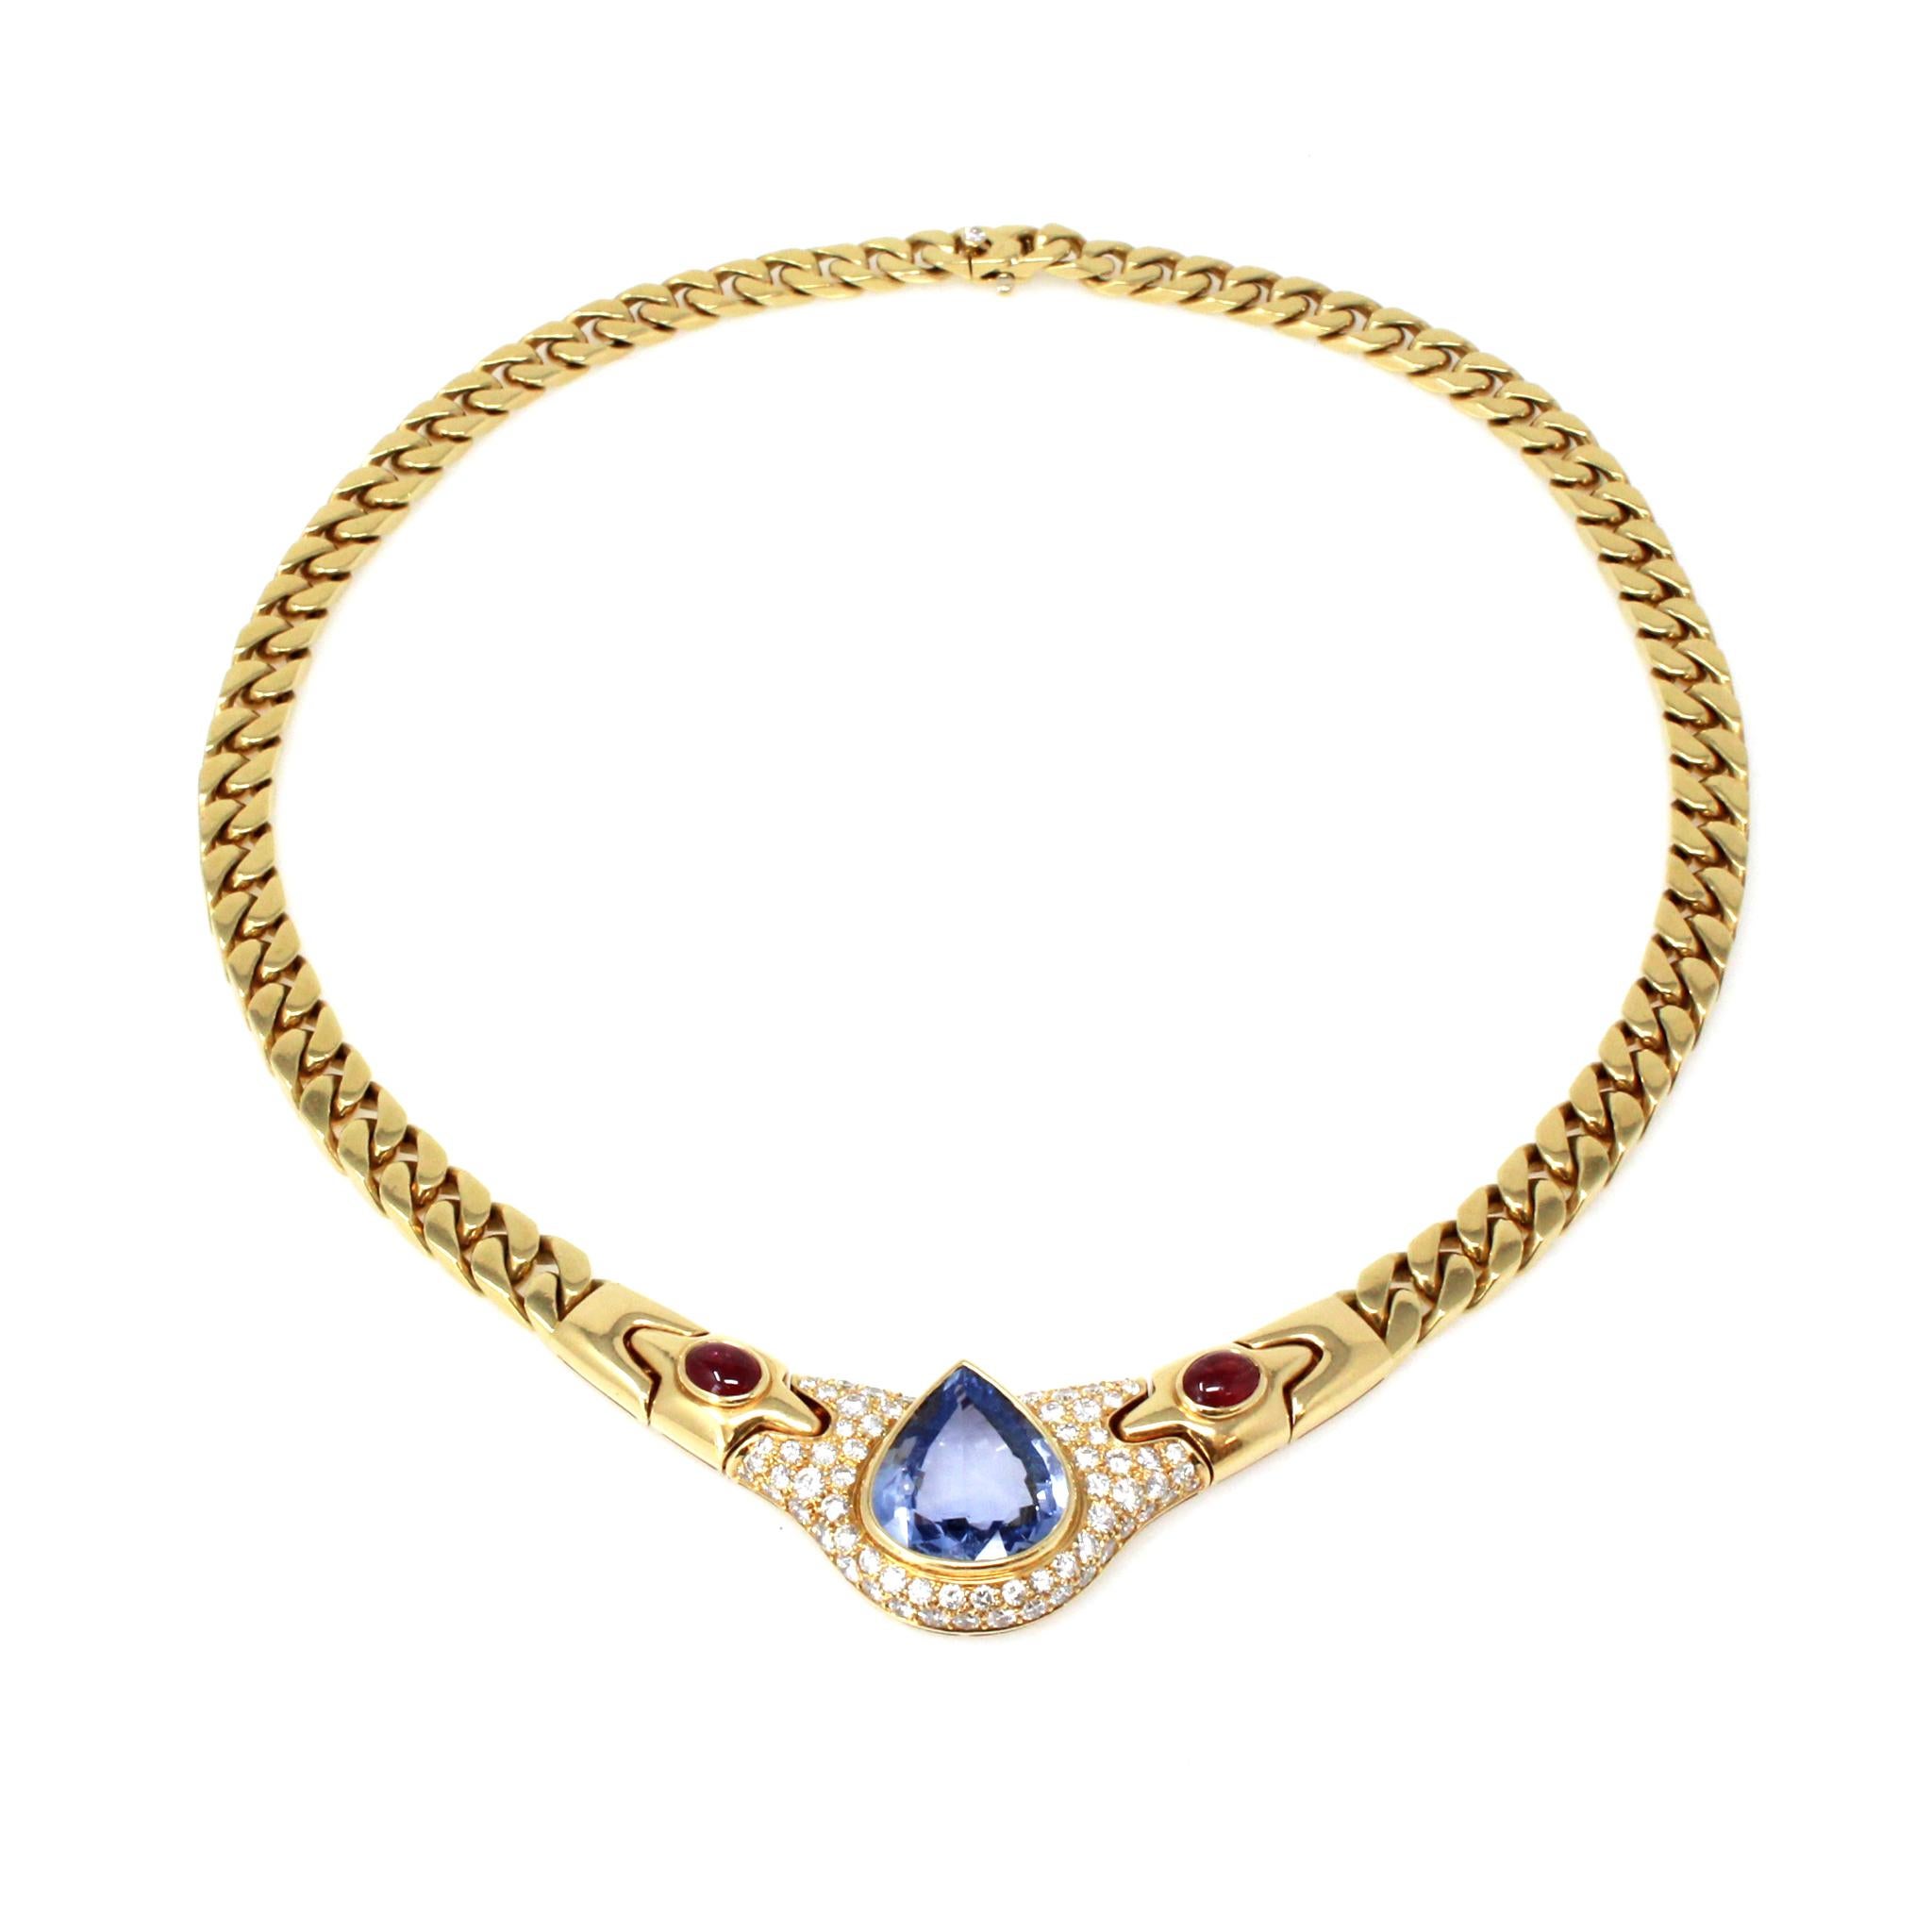 A Signed Bvlgari pear-shaped No Heat Ceylon Sapphire, Ruby and Diamond necklace circa 1980, in 18K yellow gold. Capturing our attention with its mesmerizing no heat pear-shaped 13.36 carat Ceylon Sapphire of VS clarity, this iconic design from